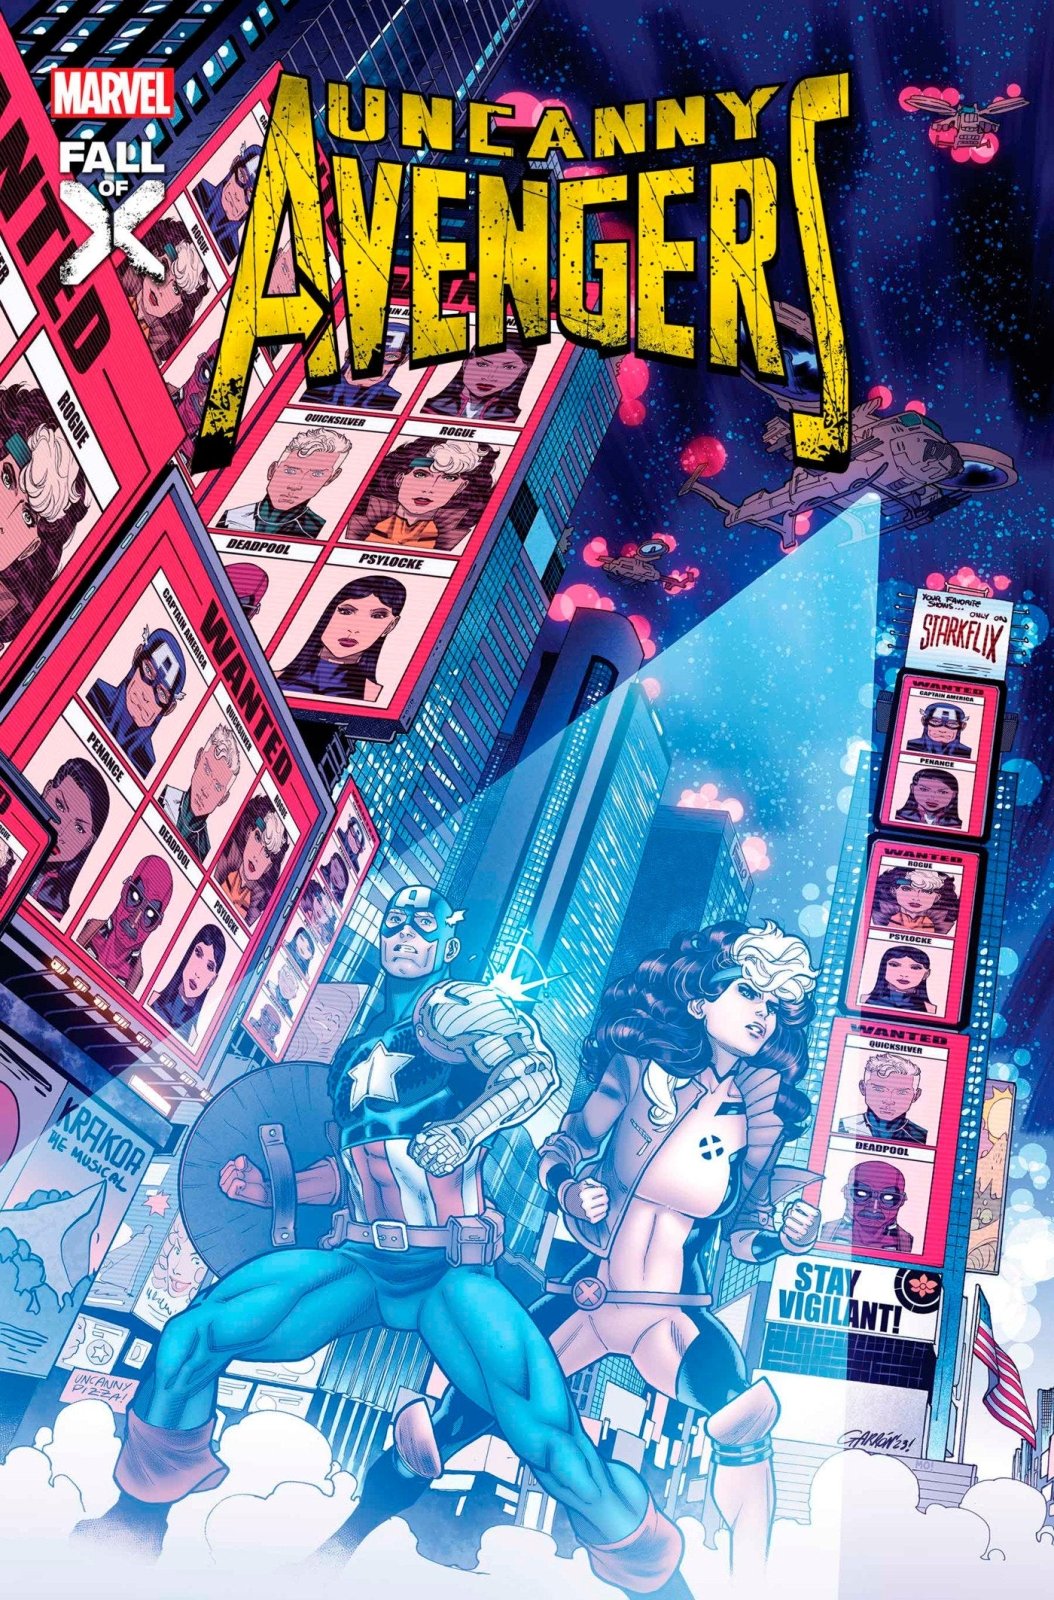 Uncanny Avengers 4 [Fall] - The Fourth Place